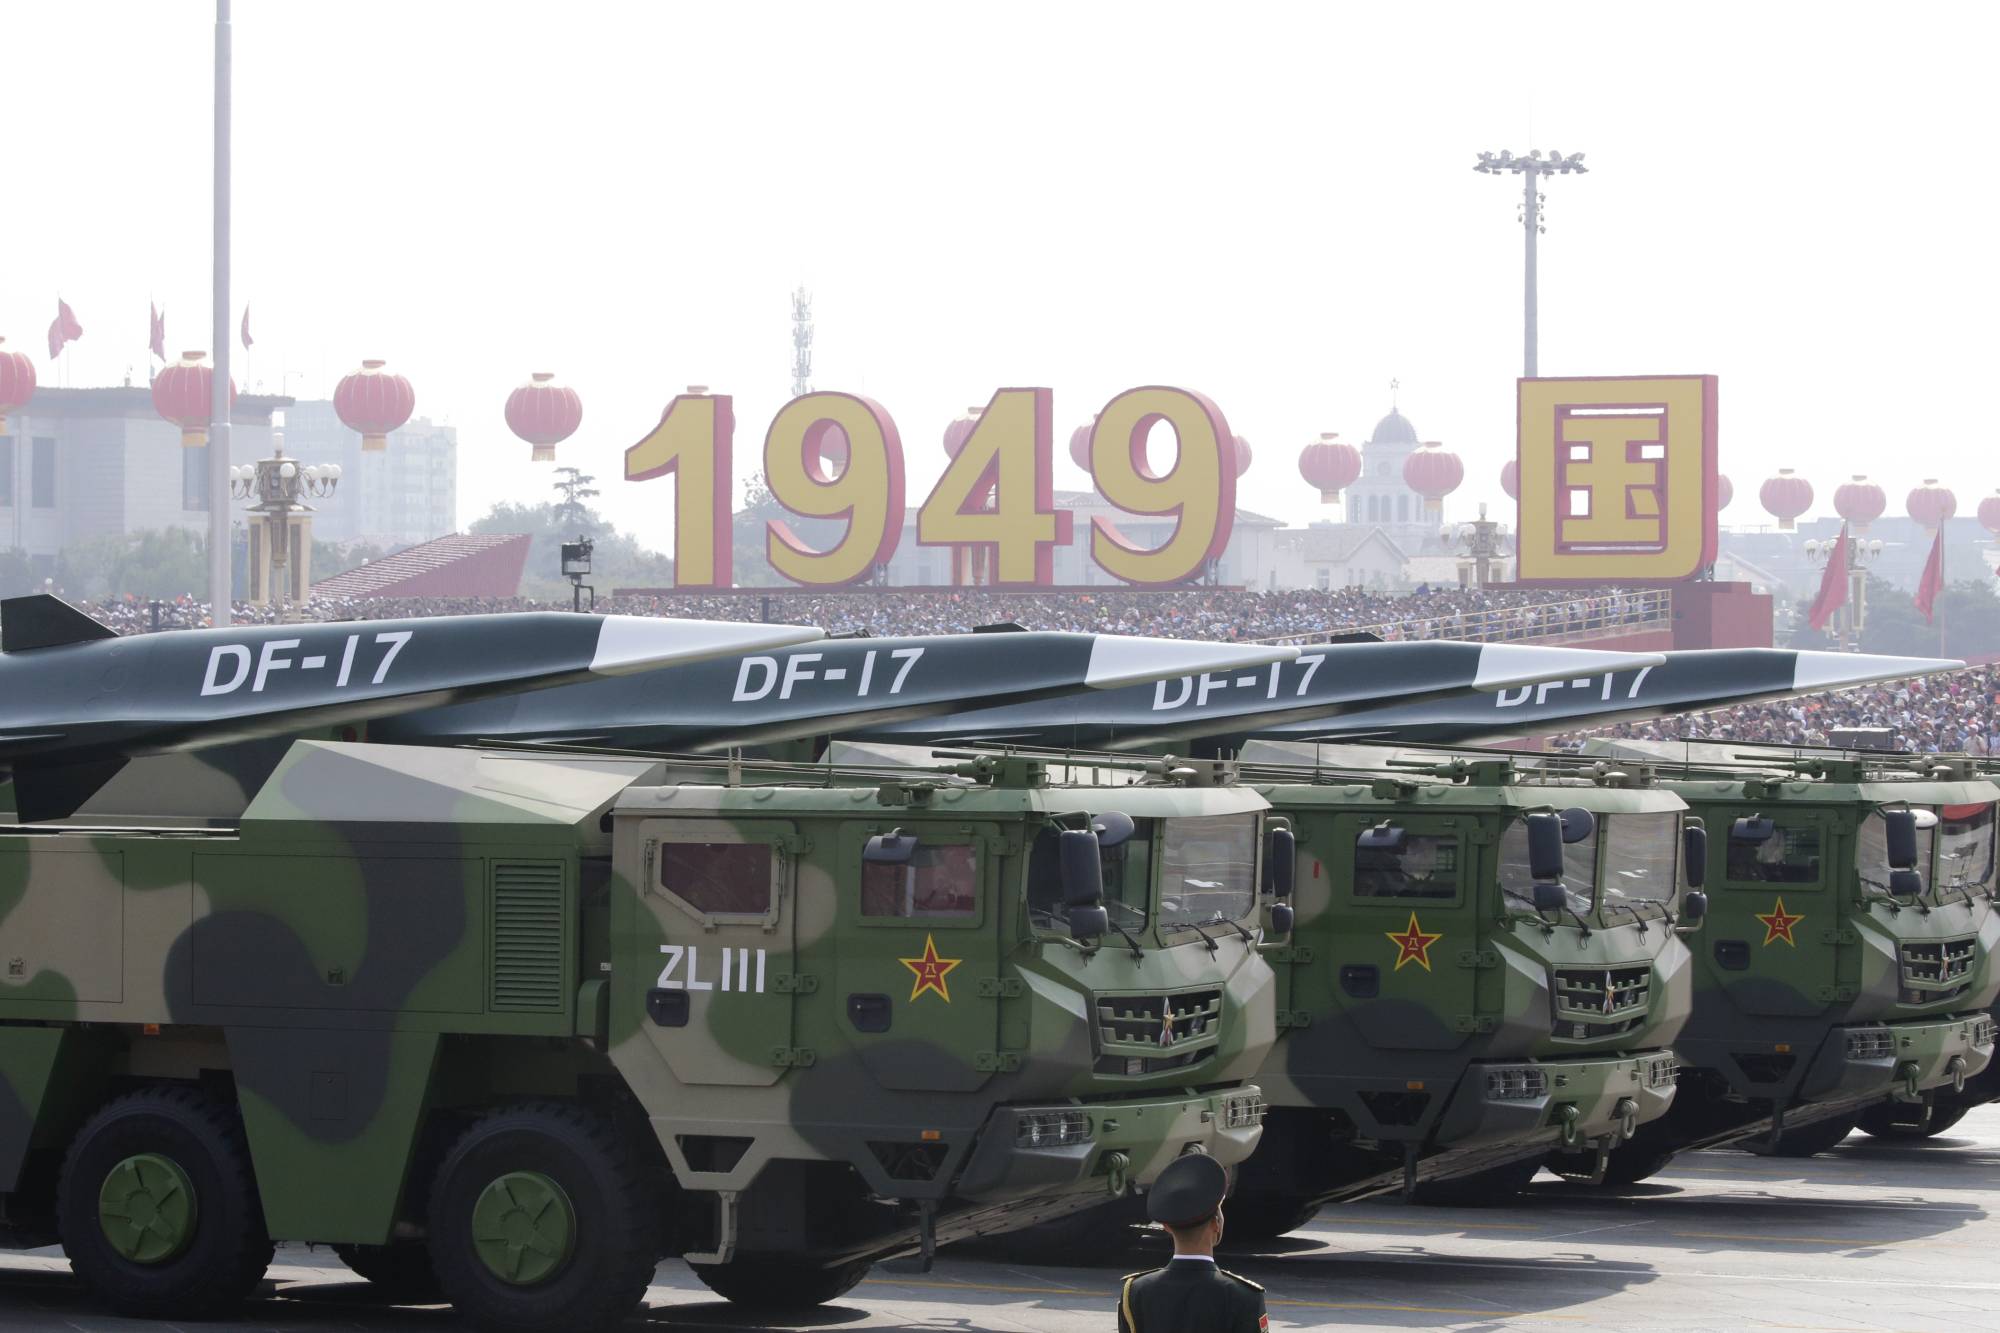 Chinese military vehicles carrying hypersonic DF-17 missiles travel past Beijing's Tiananmen Square during a military parade marking the 70th founding anniversary of the People's Republic of China on Oct. 1, 2019.  | REUTERS